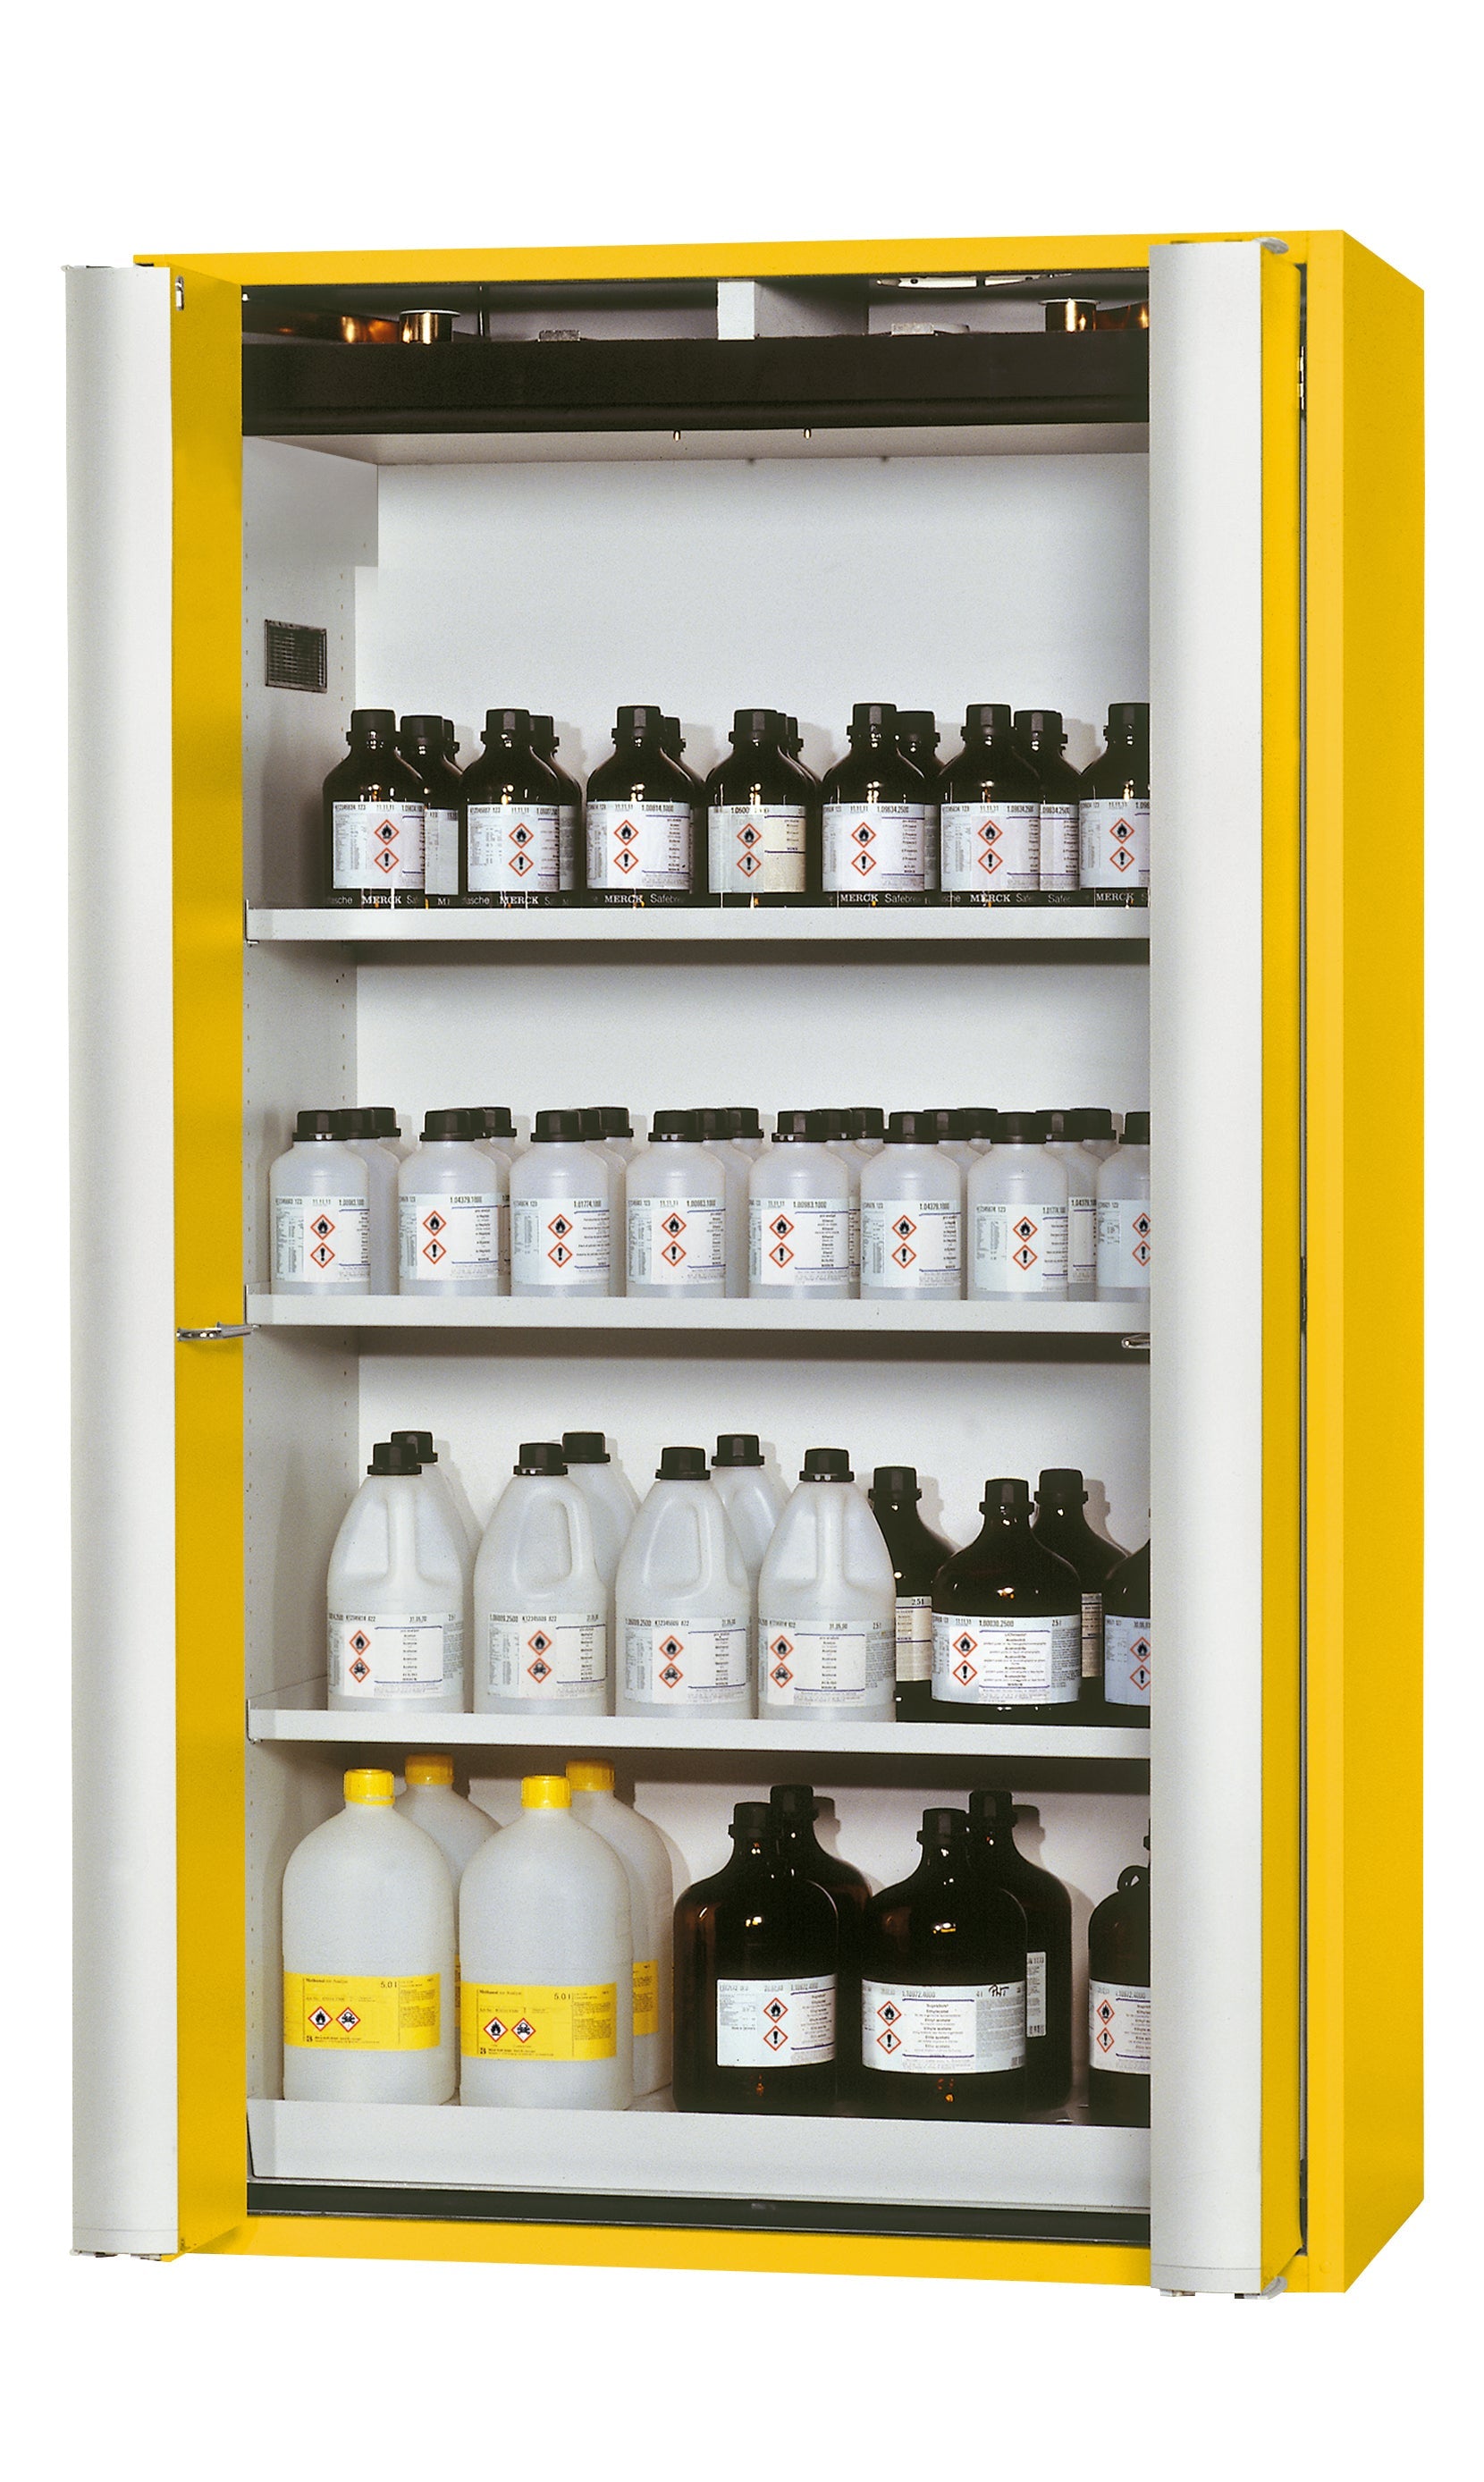 Type 90 safety storage cabinet S-PHOENIX-90 model S90.196.120.FDAS in warning yellow RAL 1004 with 4x shelf standard (stainless steel 1.4301),